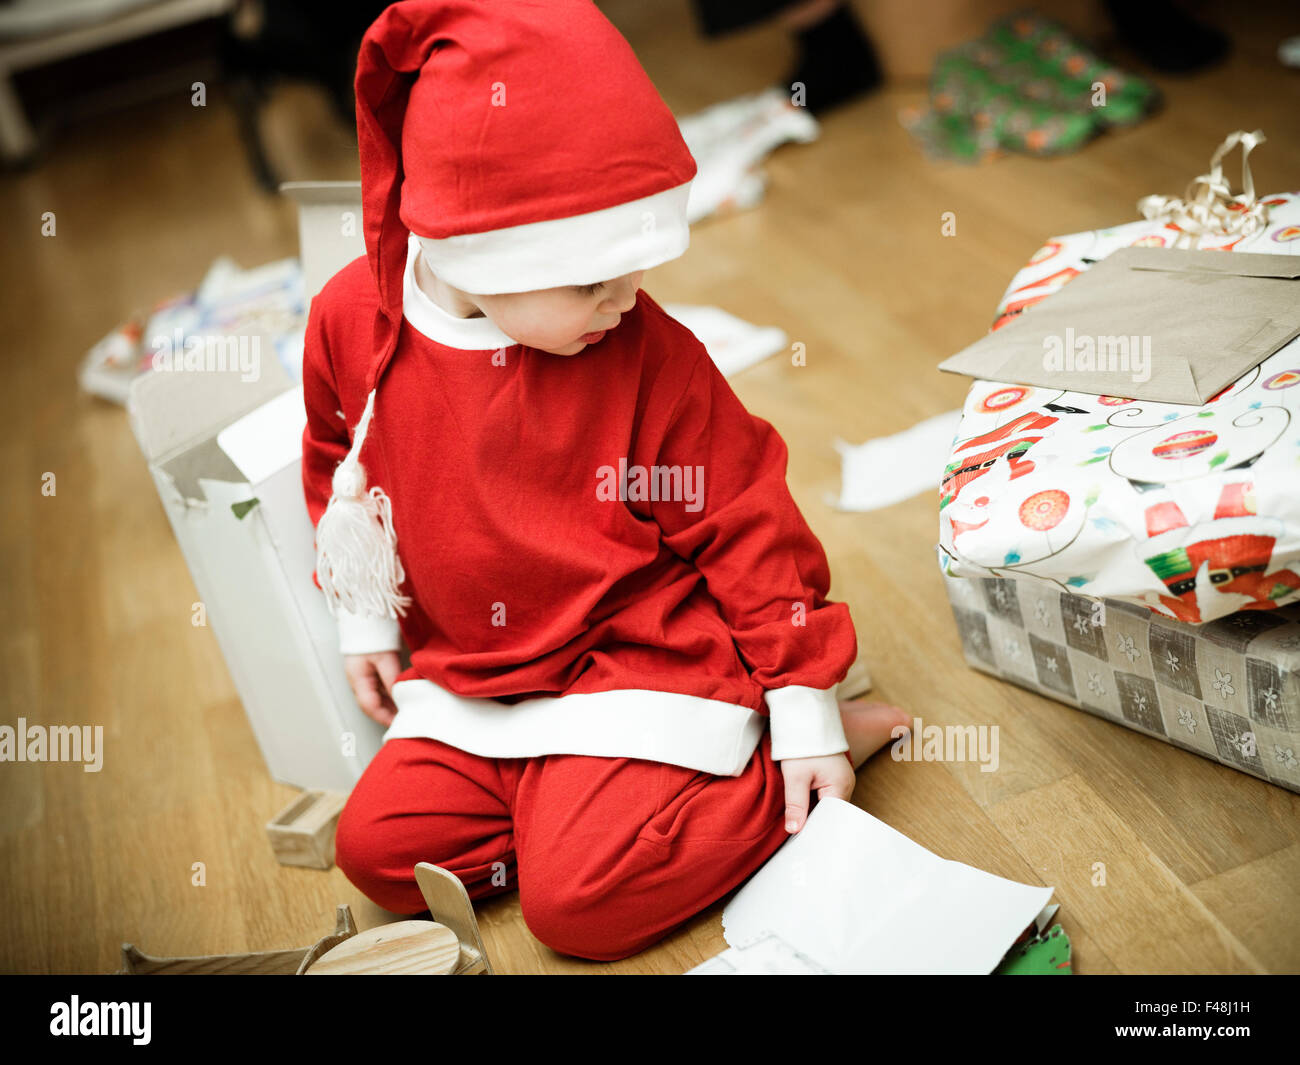 Girl dressed as Santa Claus opening Christmas presents, Sweden. Stock Photo